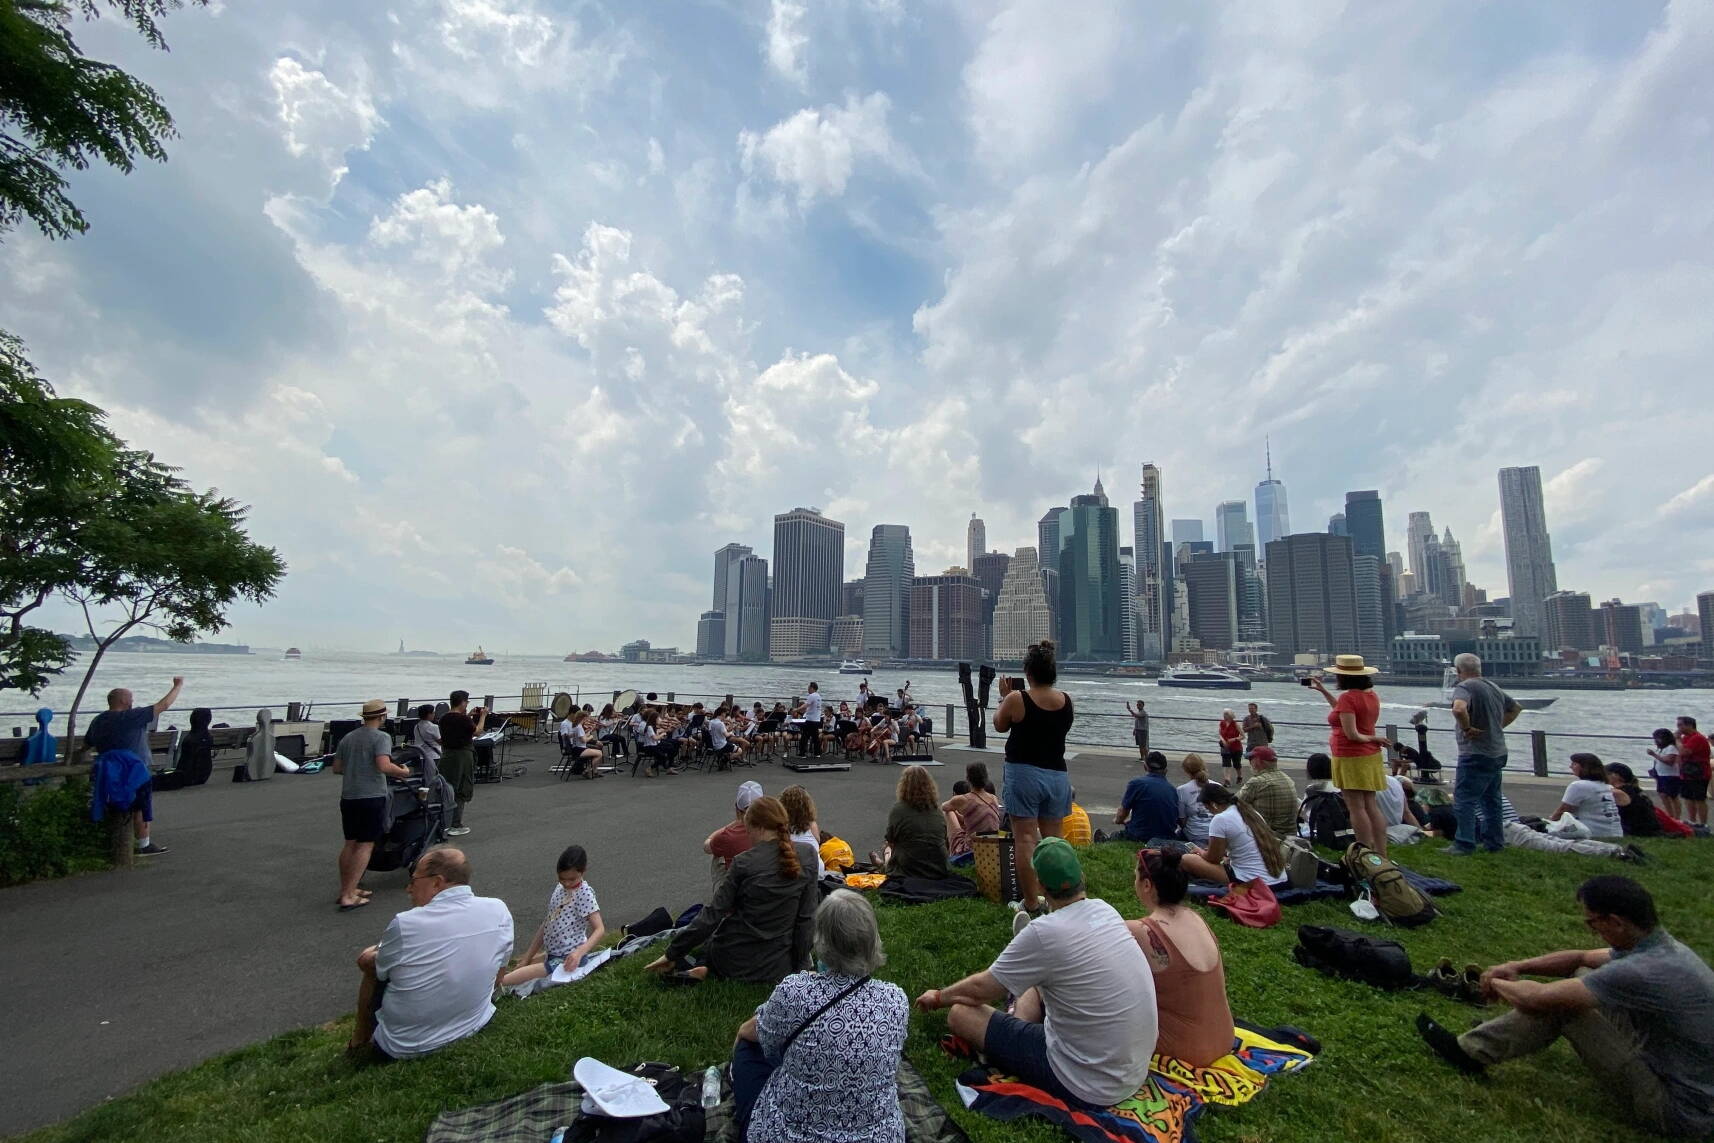 The Juneau student ensemble Aurora Strings performs at Brooklyn Bridge Park last summer, a day before appearance at Carnegie Hall. (Photo courtesy of Juneau String Ensembles)